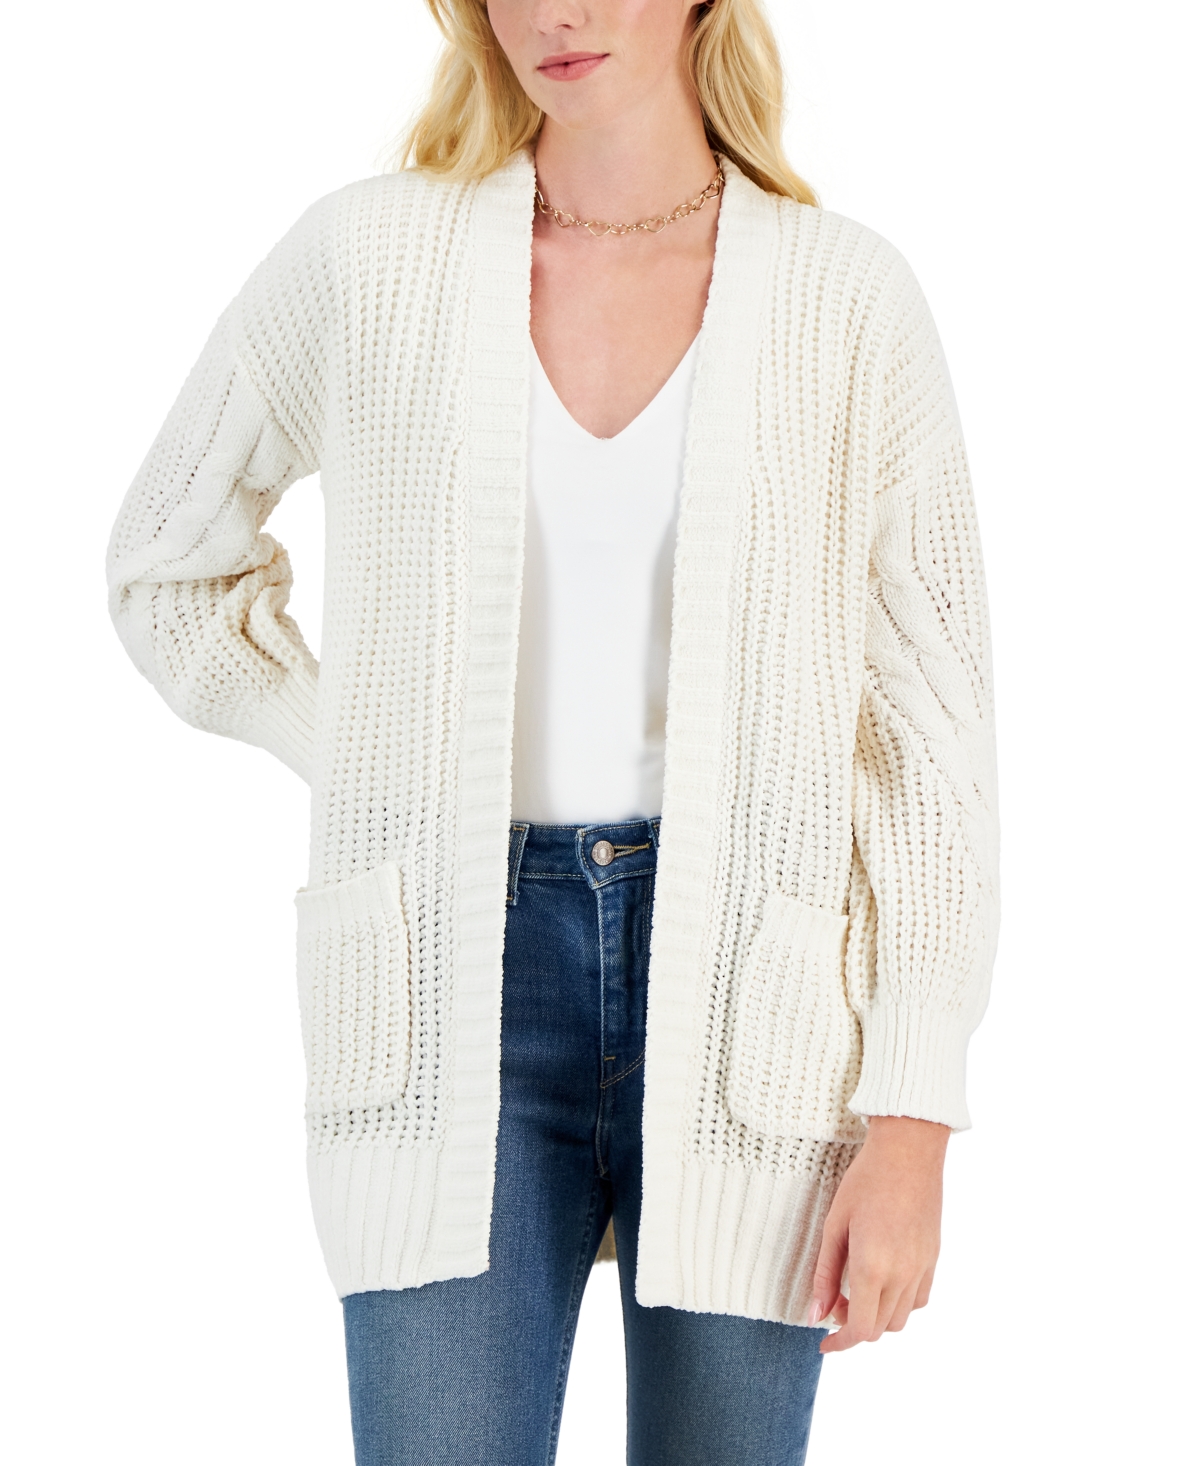 Topshop zip through cable knit cardigan in oatmeal